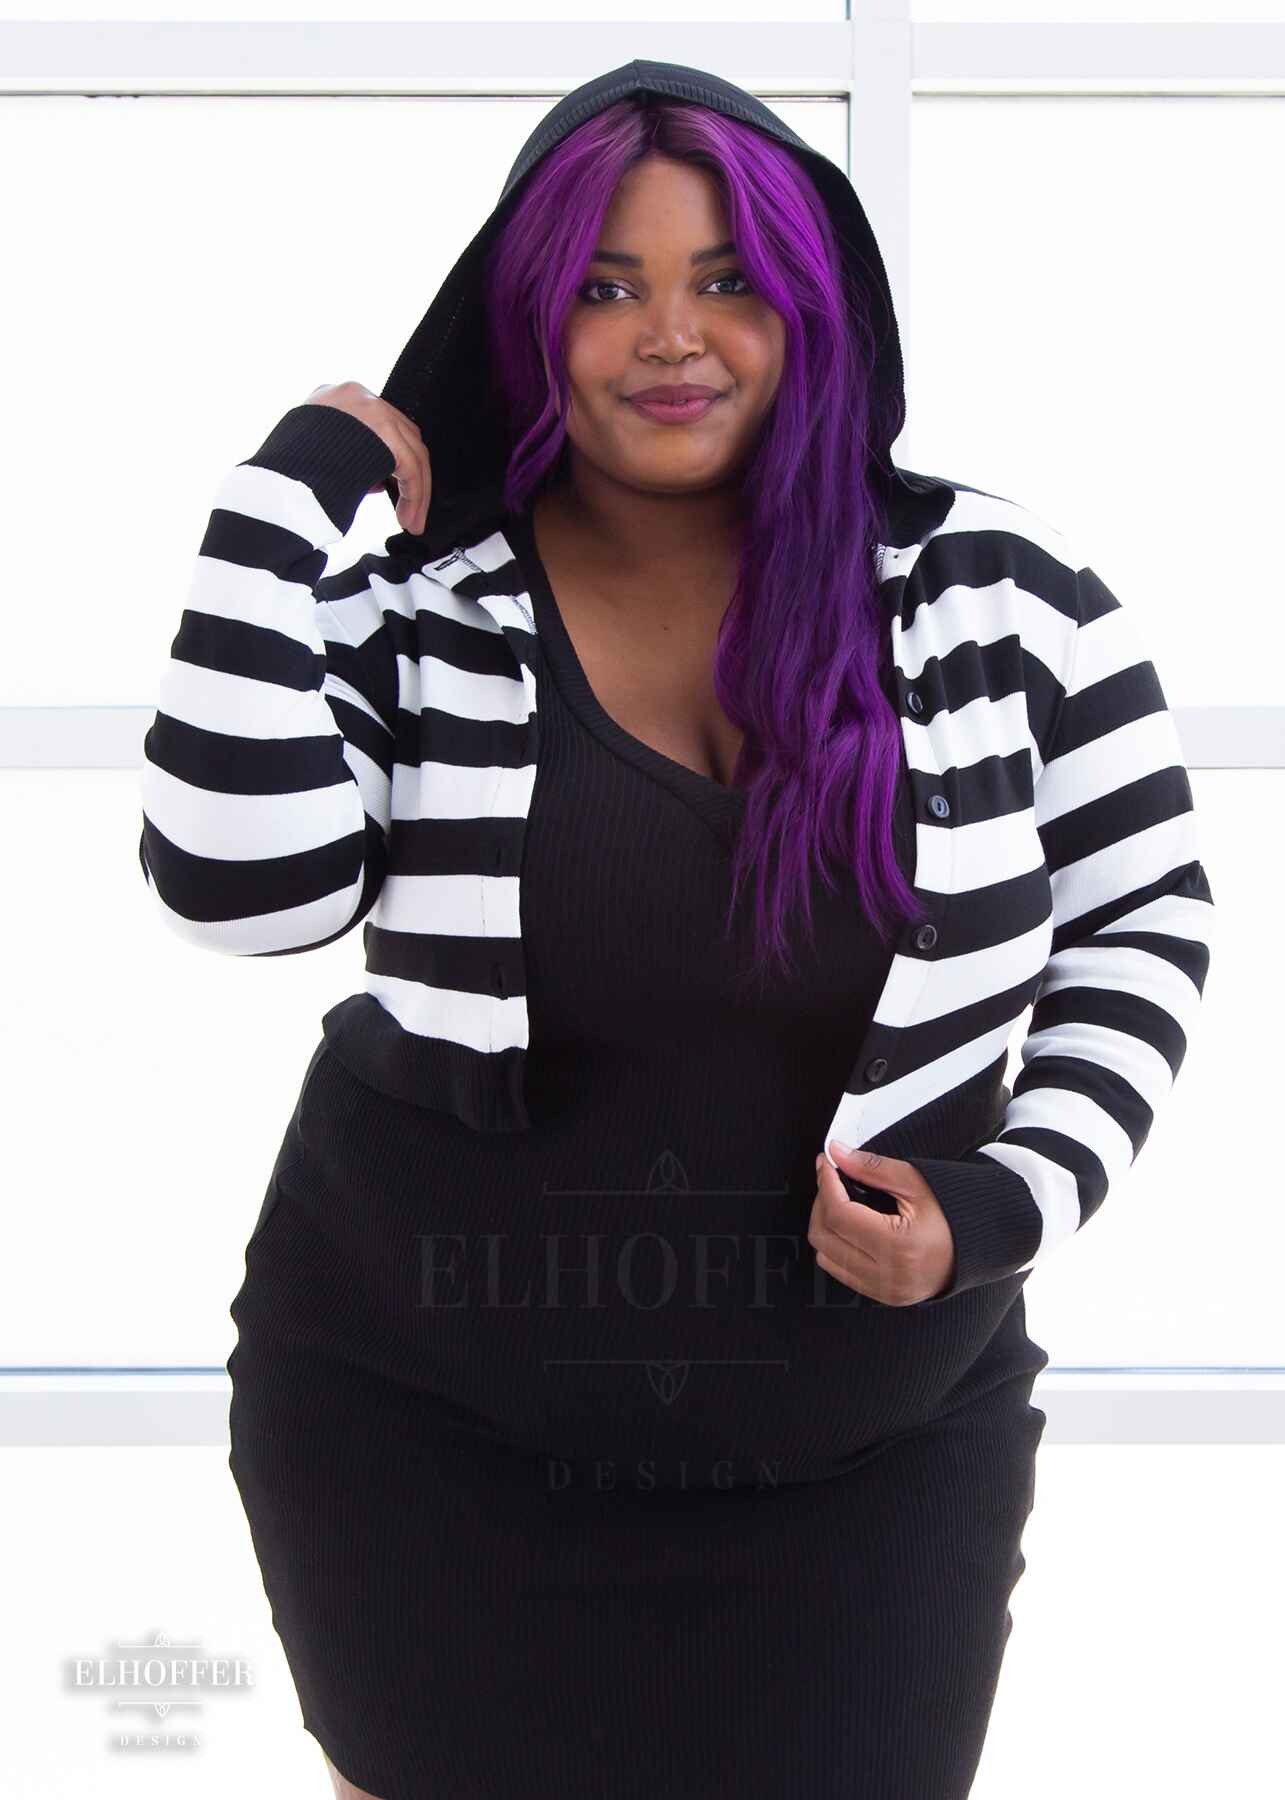 Jade, a medium dark skinned 2xl model with long wavy purple hair, is wearing a cropped knit button up cardigan with long sleeves, black and white horizontal stripes, and a black hood.